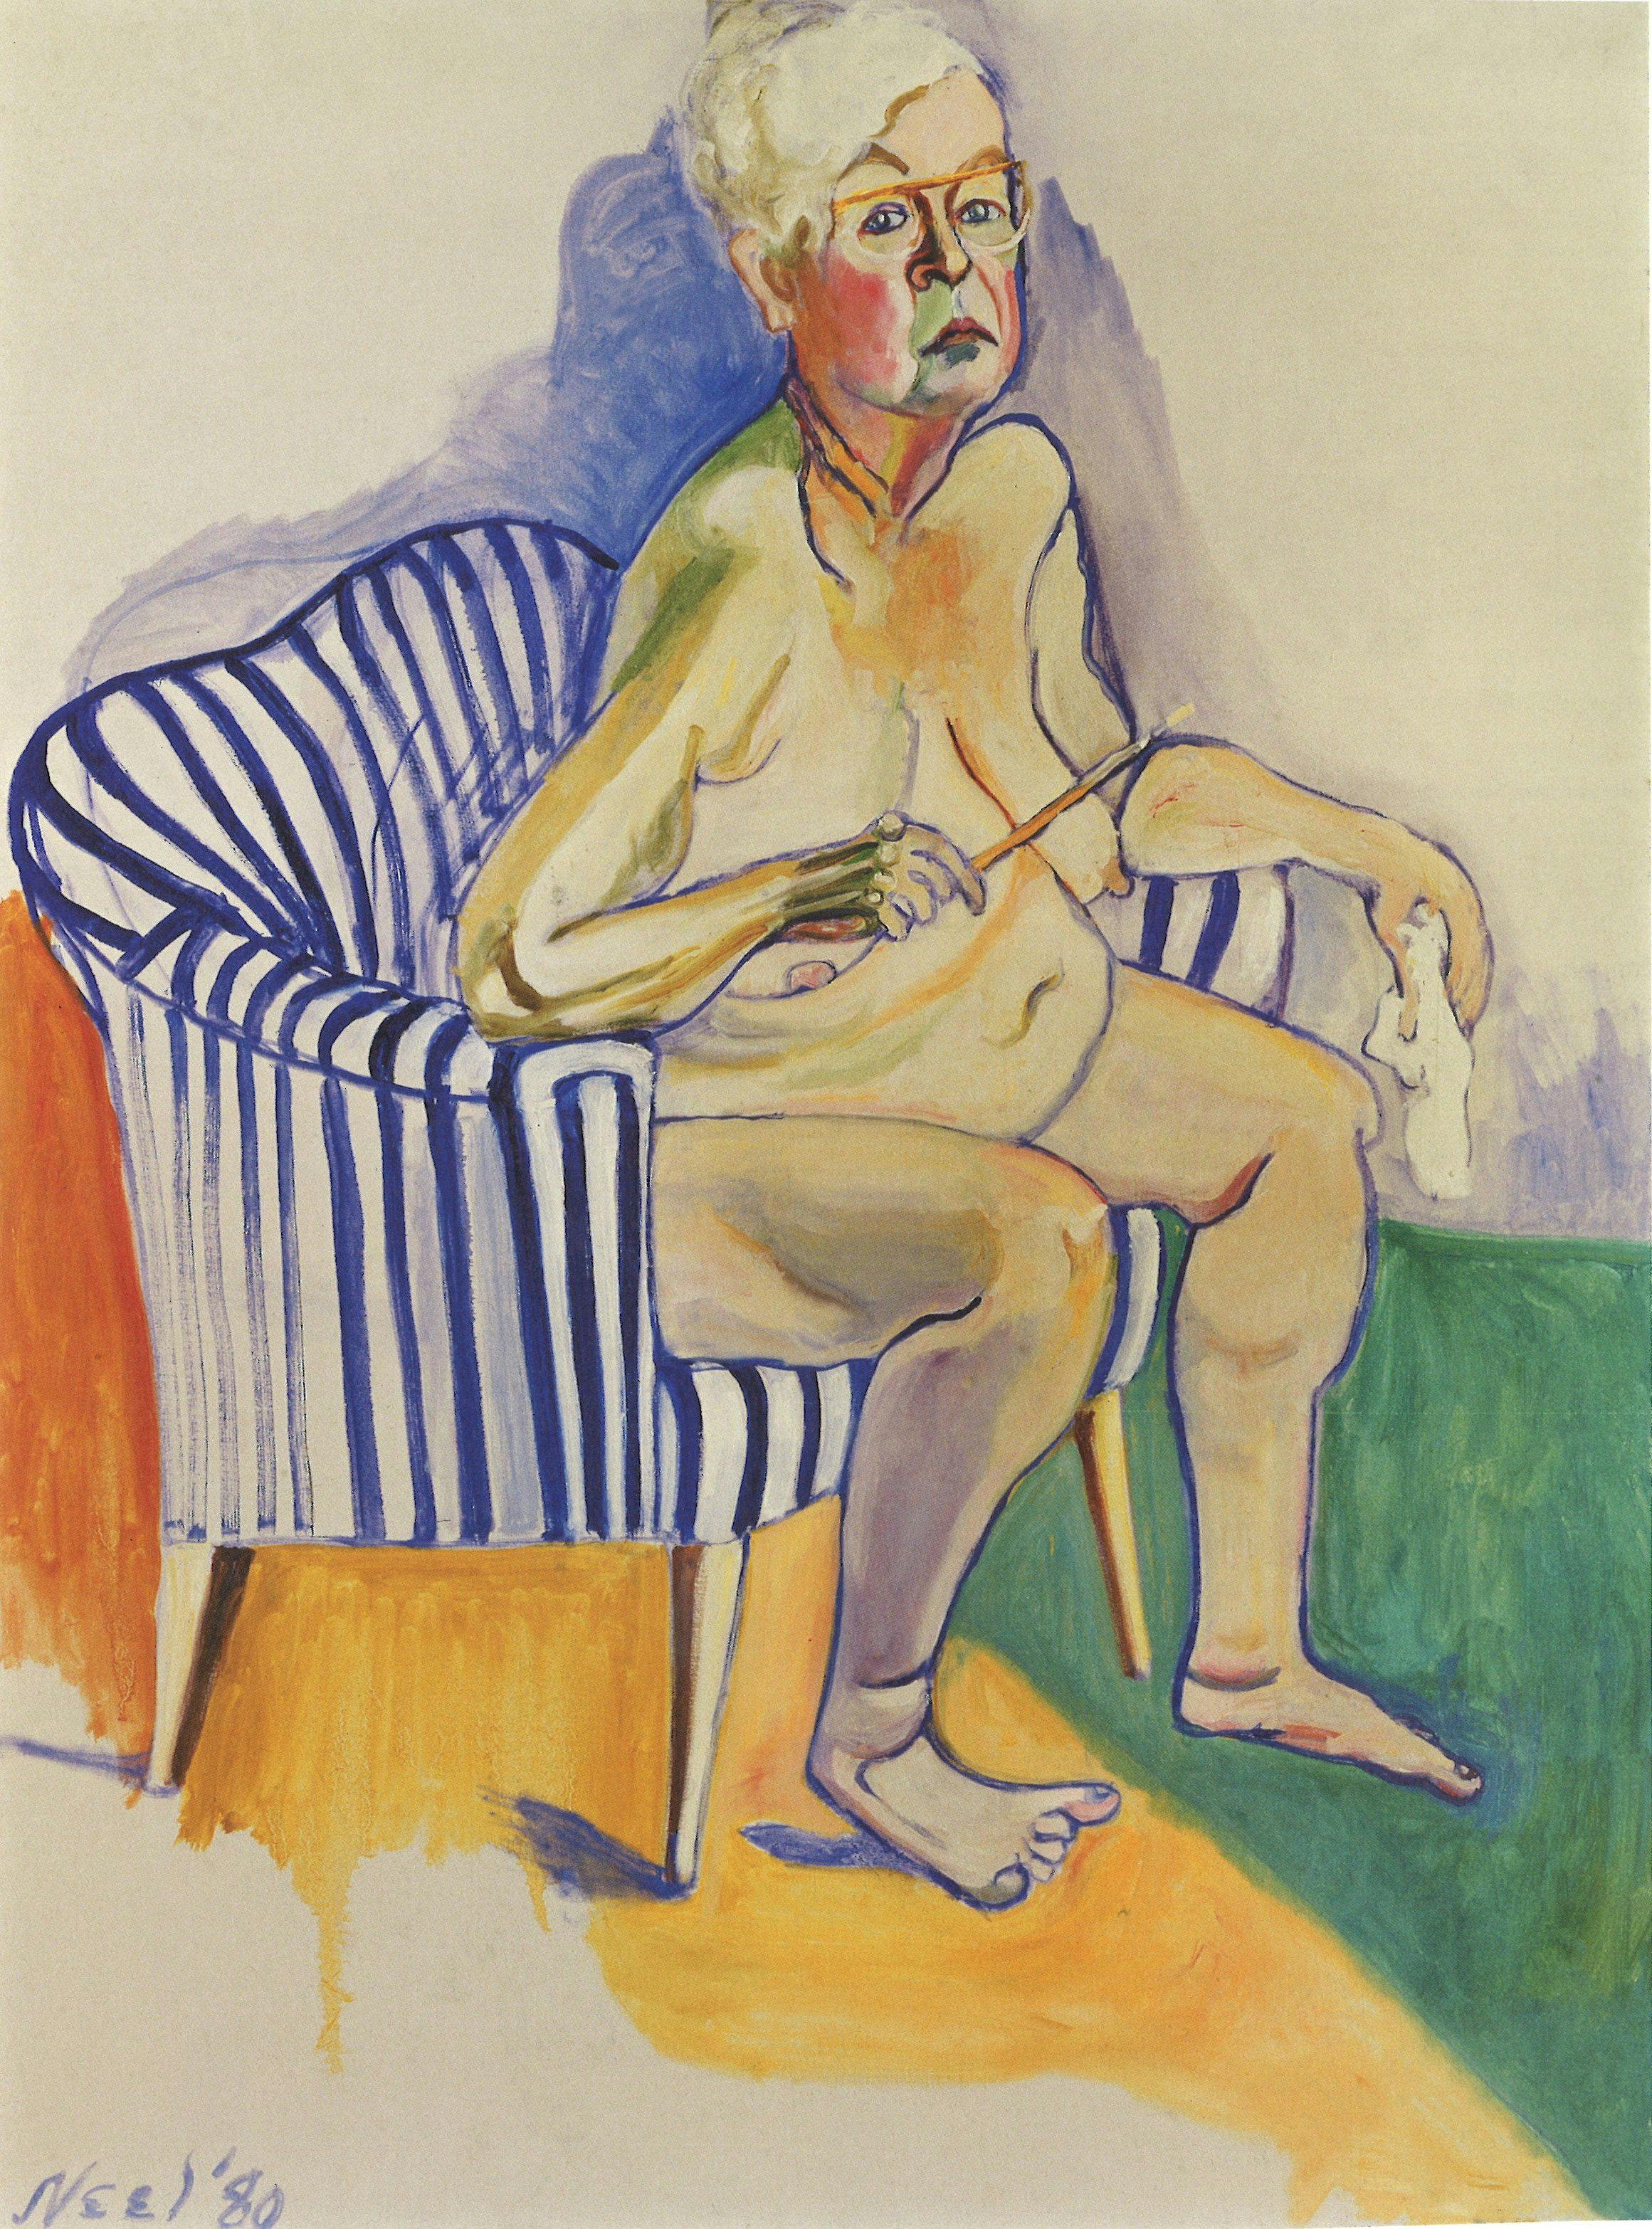 A painting by Alice Neel titled Self-Portrait, dated 1980